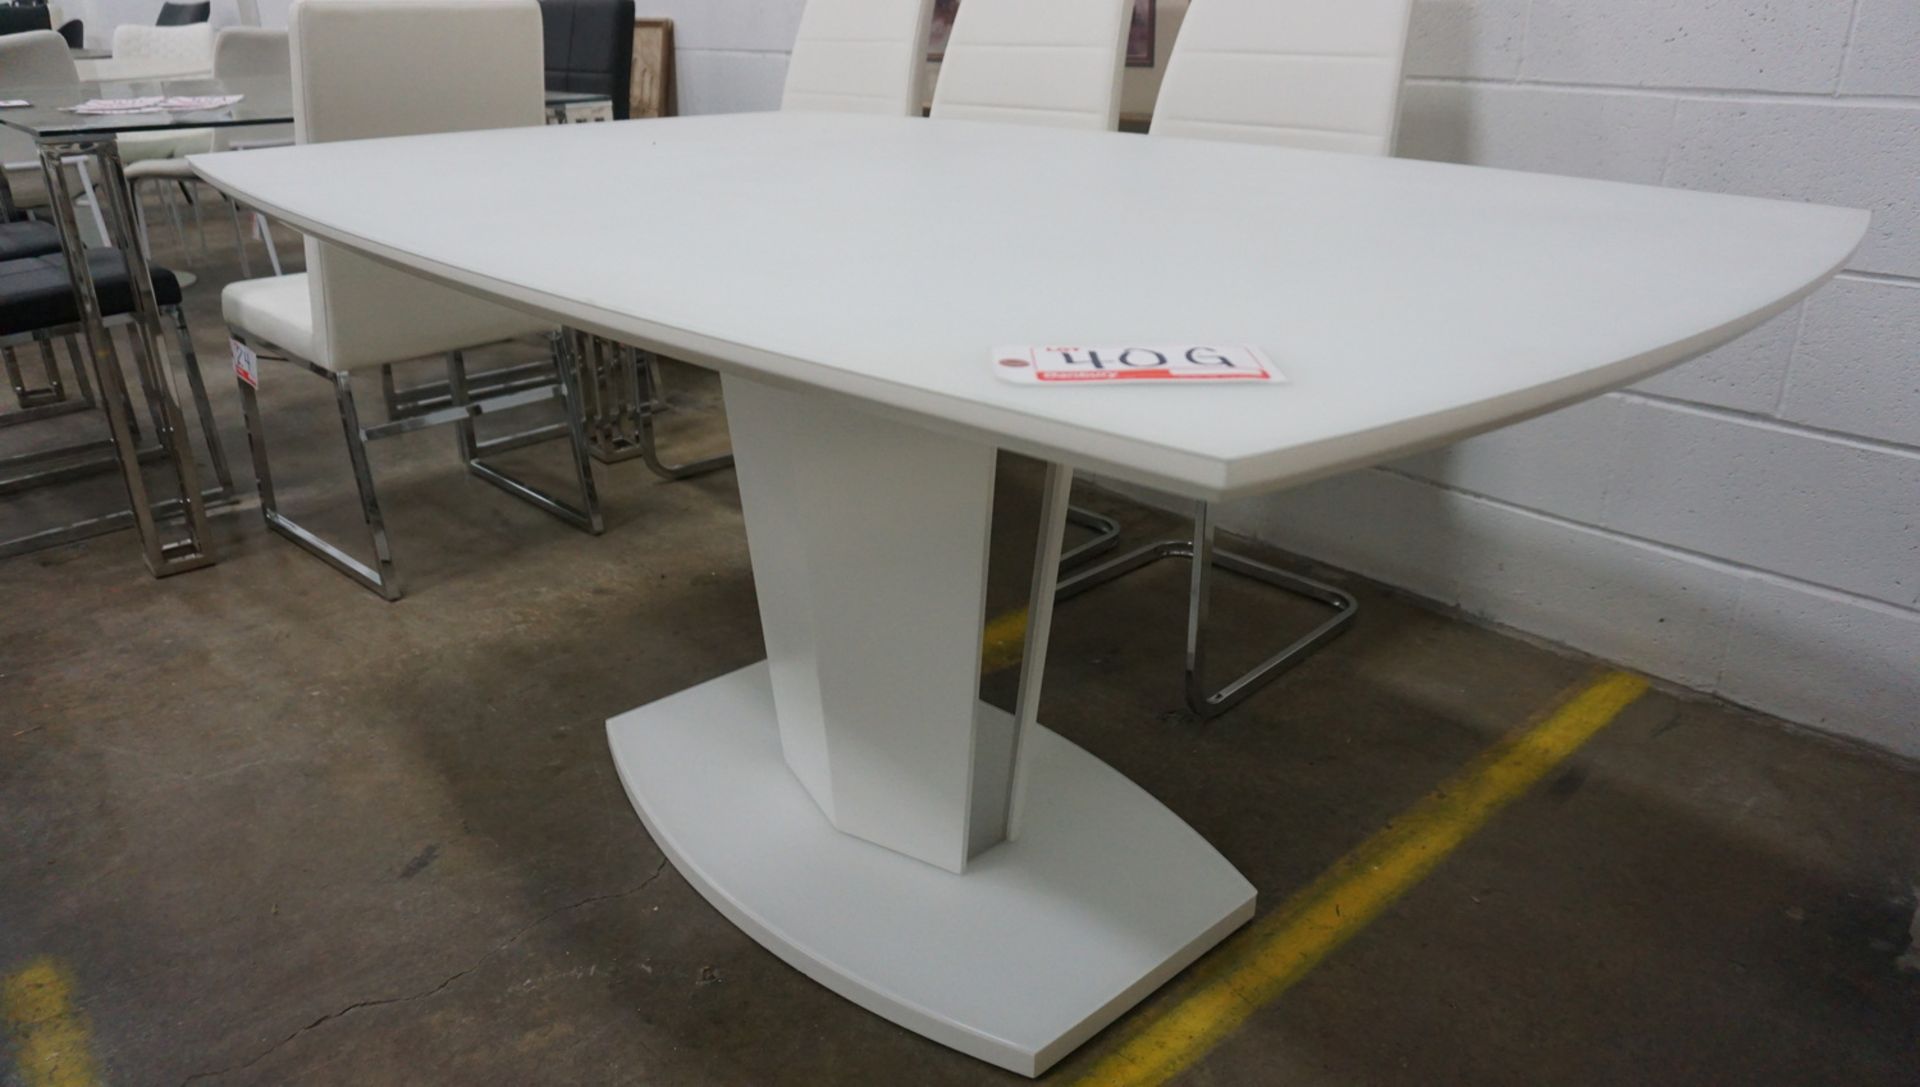 MATTE WHITE 63" X 39.5" X 30"H DINING TABLE W/ STAINLESS STEEL ACCENTS AND SAND BLASTED GLASS ON